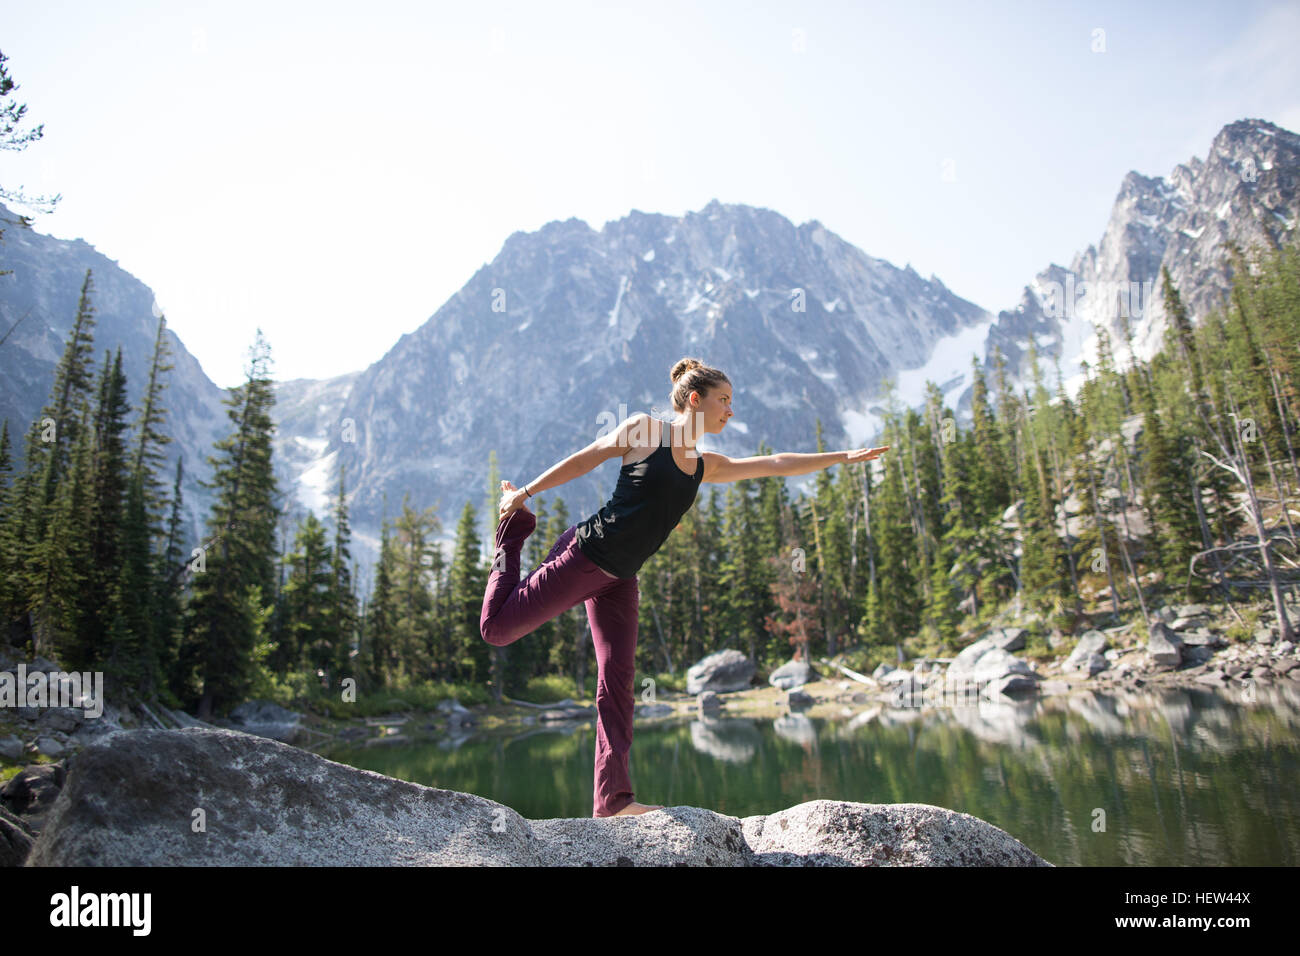 Young woman standing on rock beside lake, in yoga pose, The Enchantments, Alpine Lakes Wilderness, Washington, USA Stock Photo